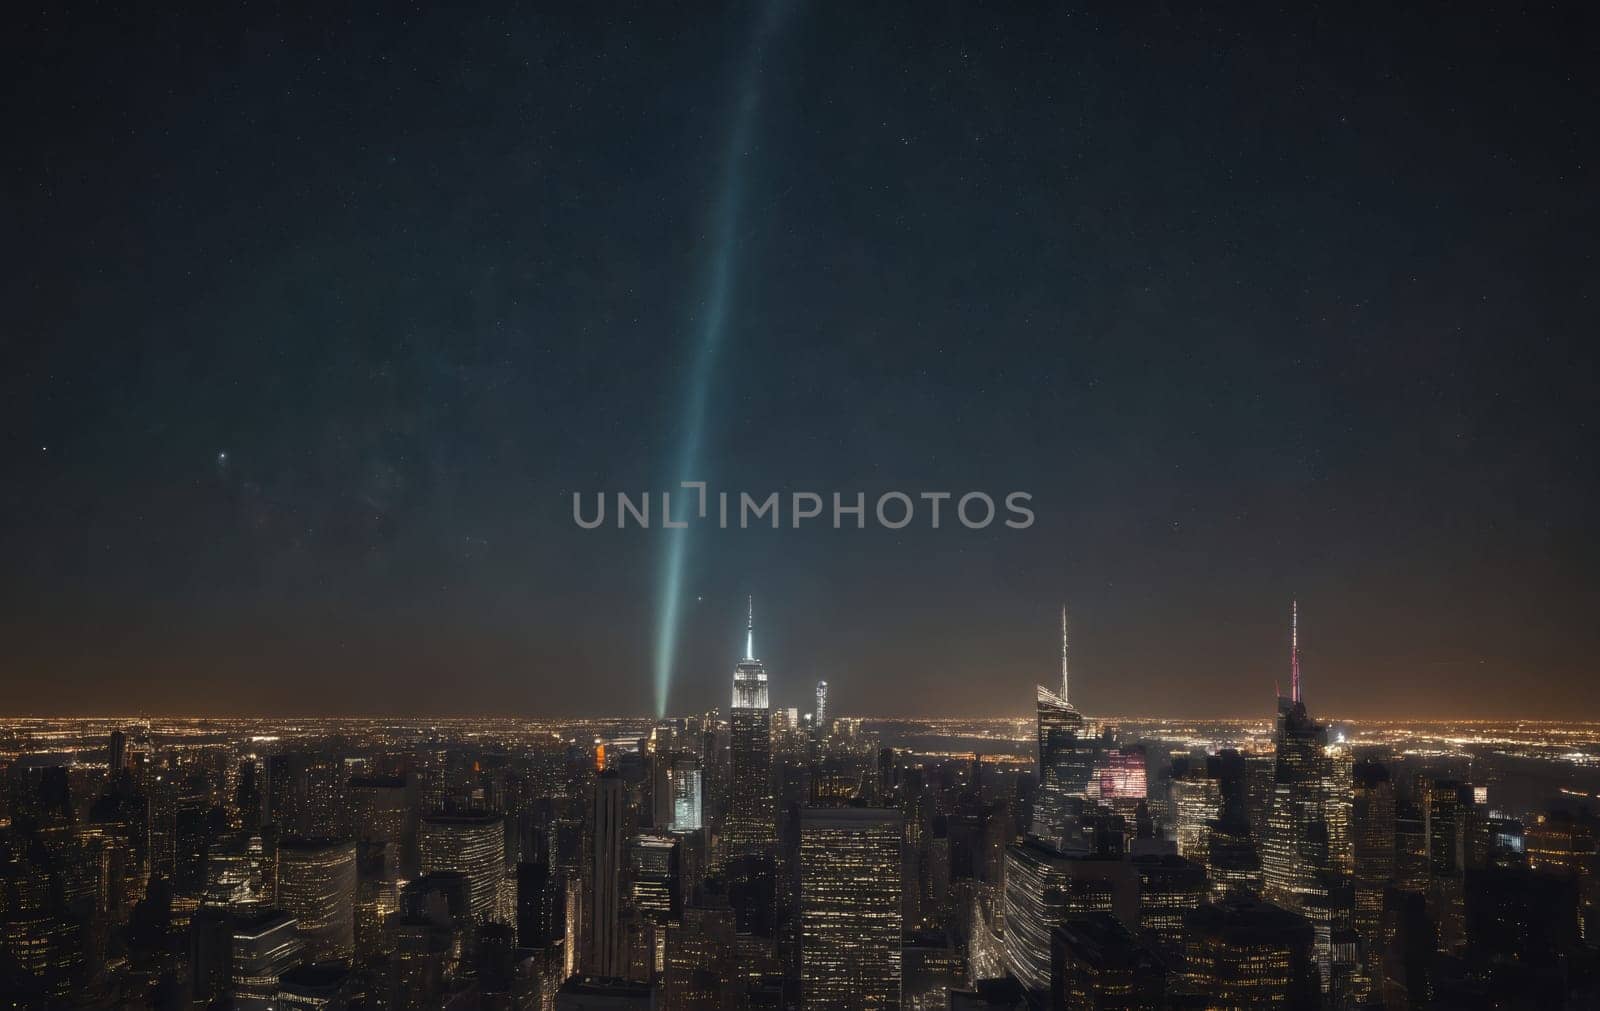 An urban skyline at night with a stunning view of the milky way in the sky, featuring towering skyscrapers and city lights illuminating the horizon